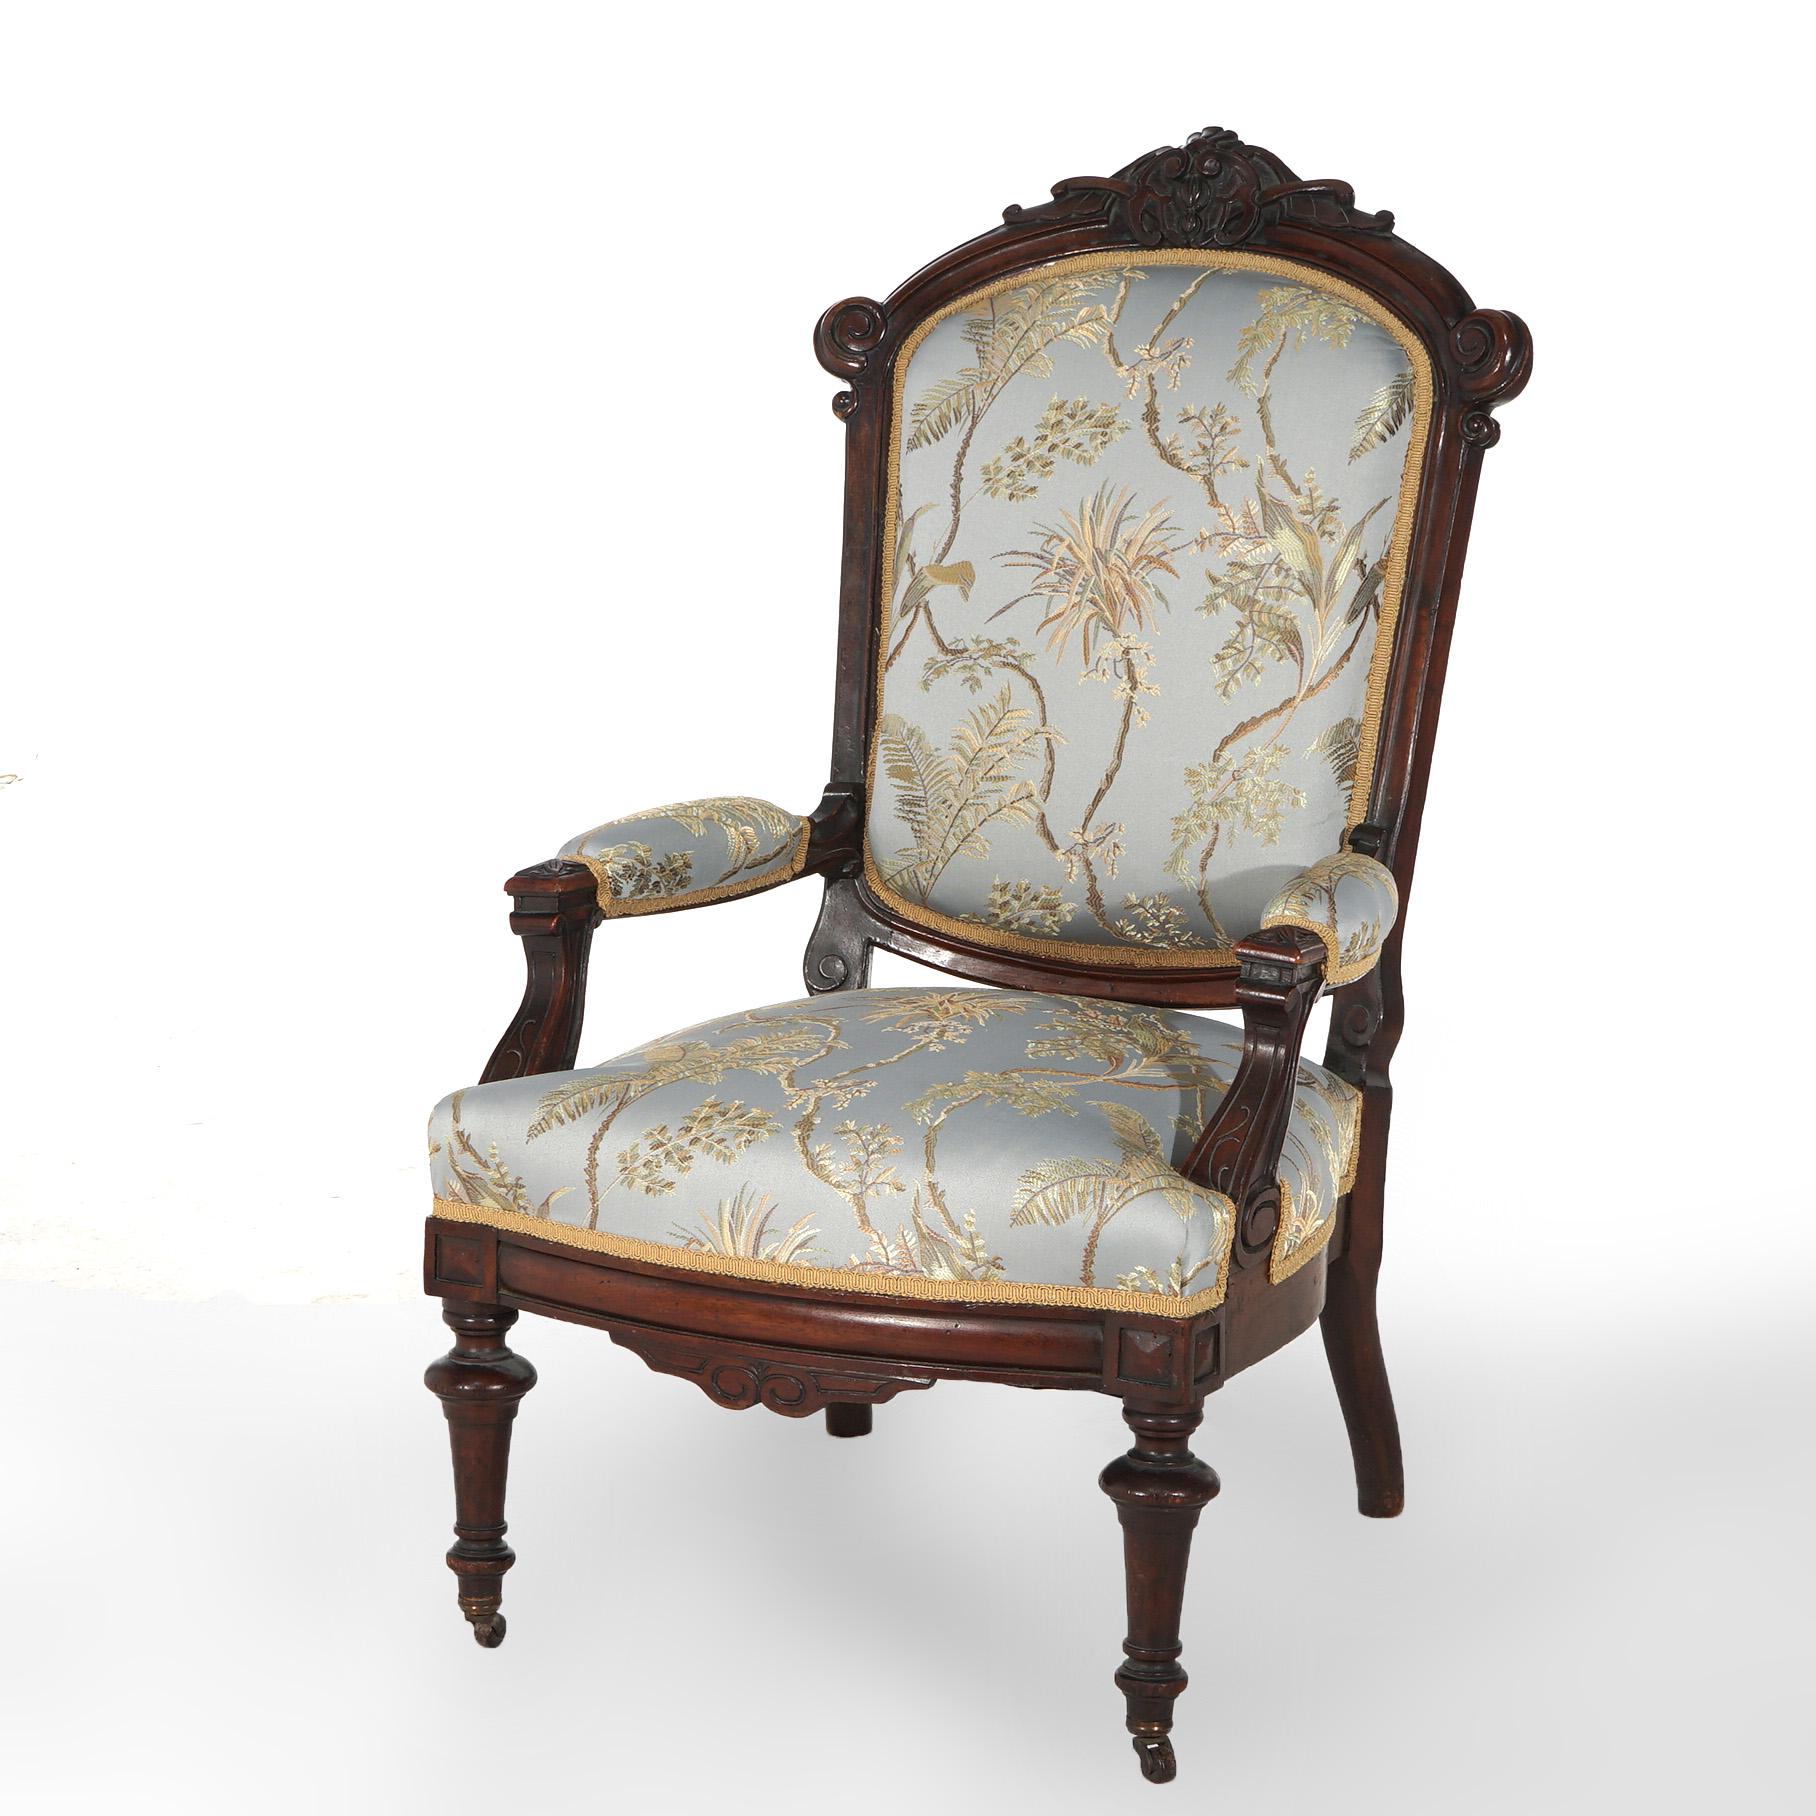 ***Ask About Reduced In-House Delivery Rates - Reliable Professional Service & Fully Insured***

Antique Renaissance Carved Walnut Upholstered Gentleman’s Chair C1890.

Measures - 40.25